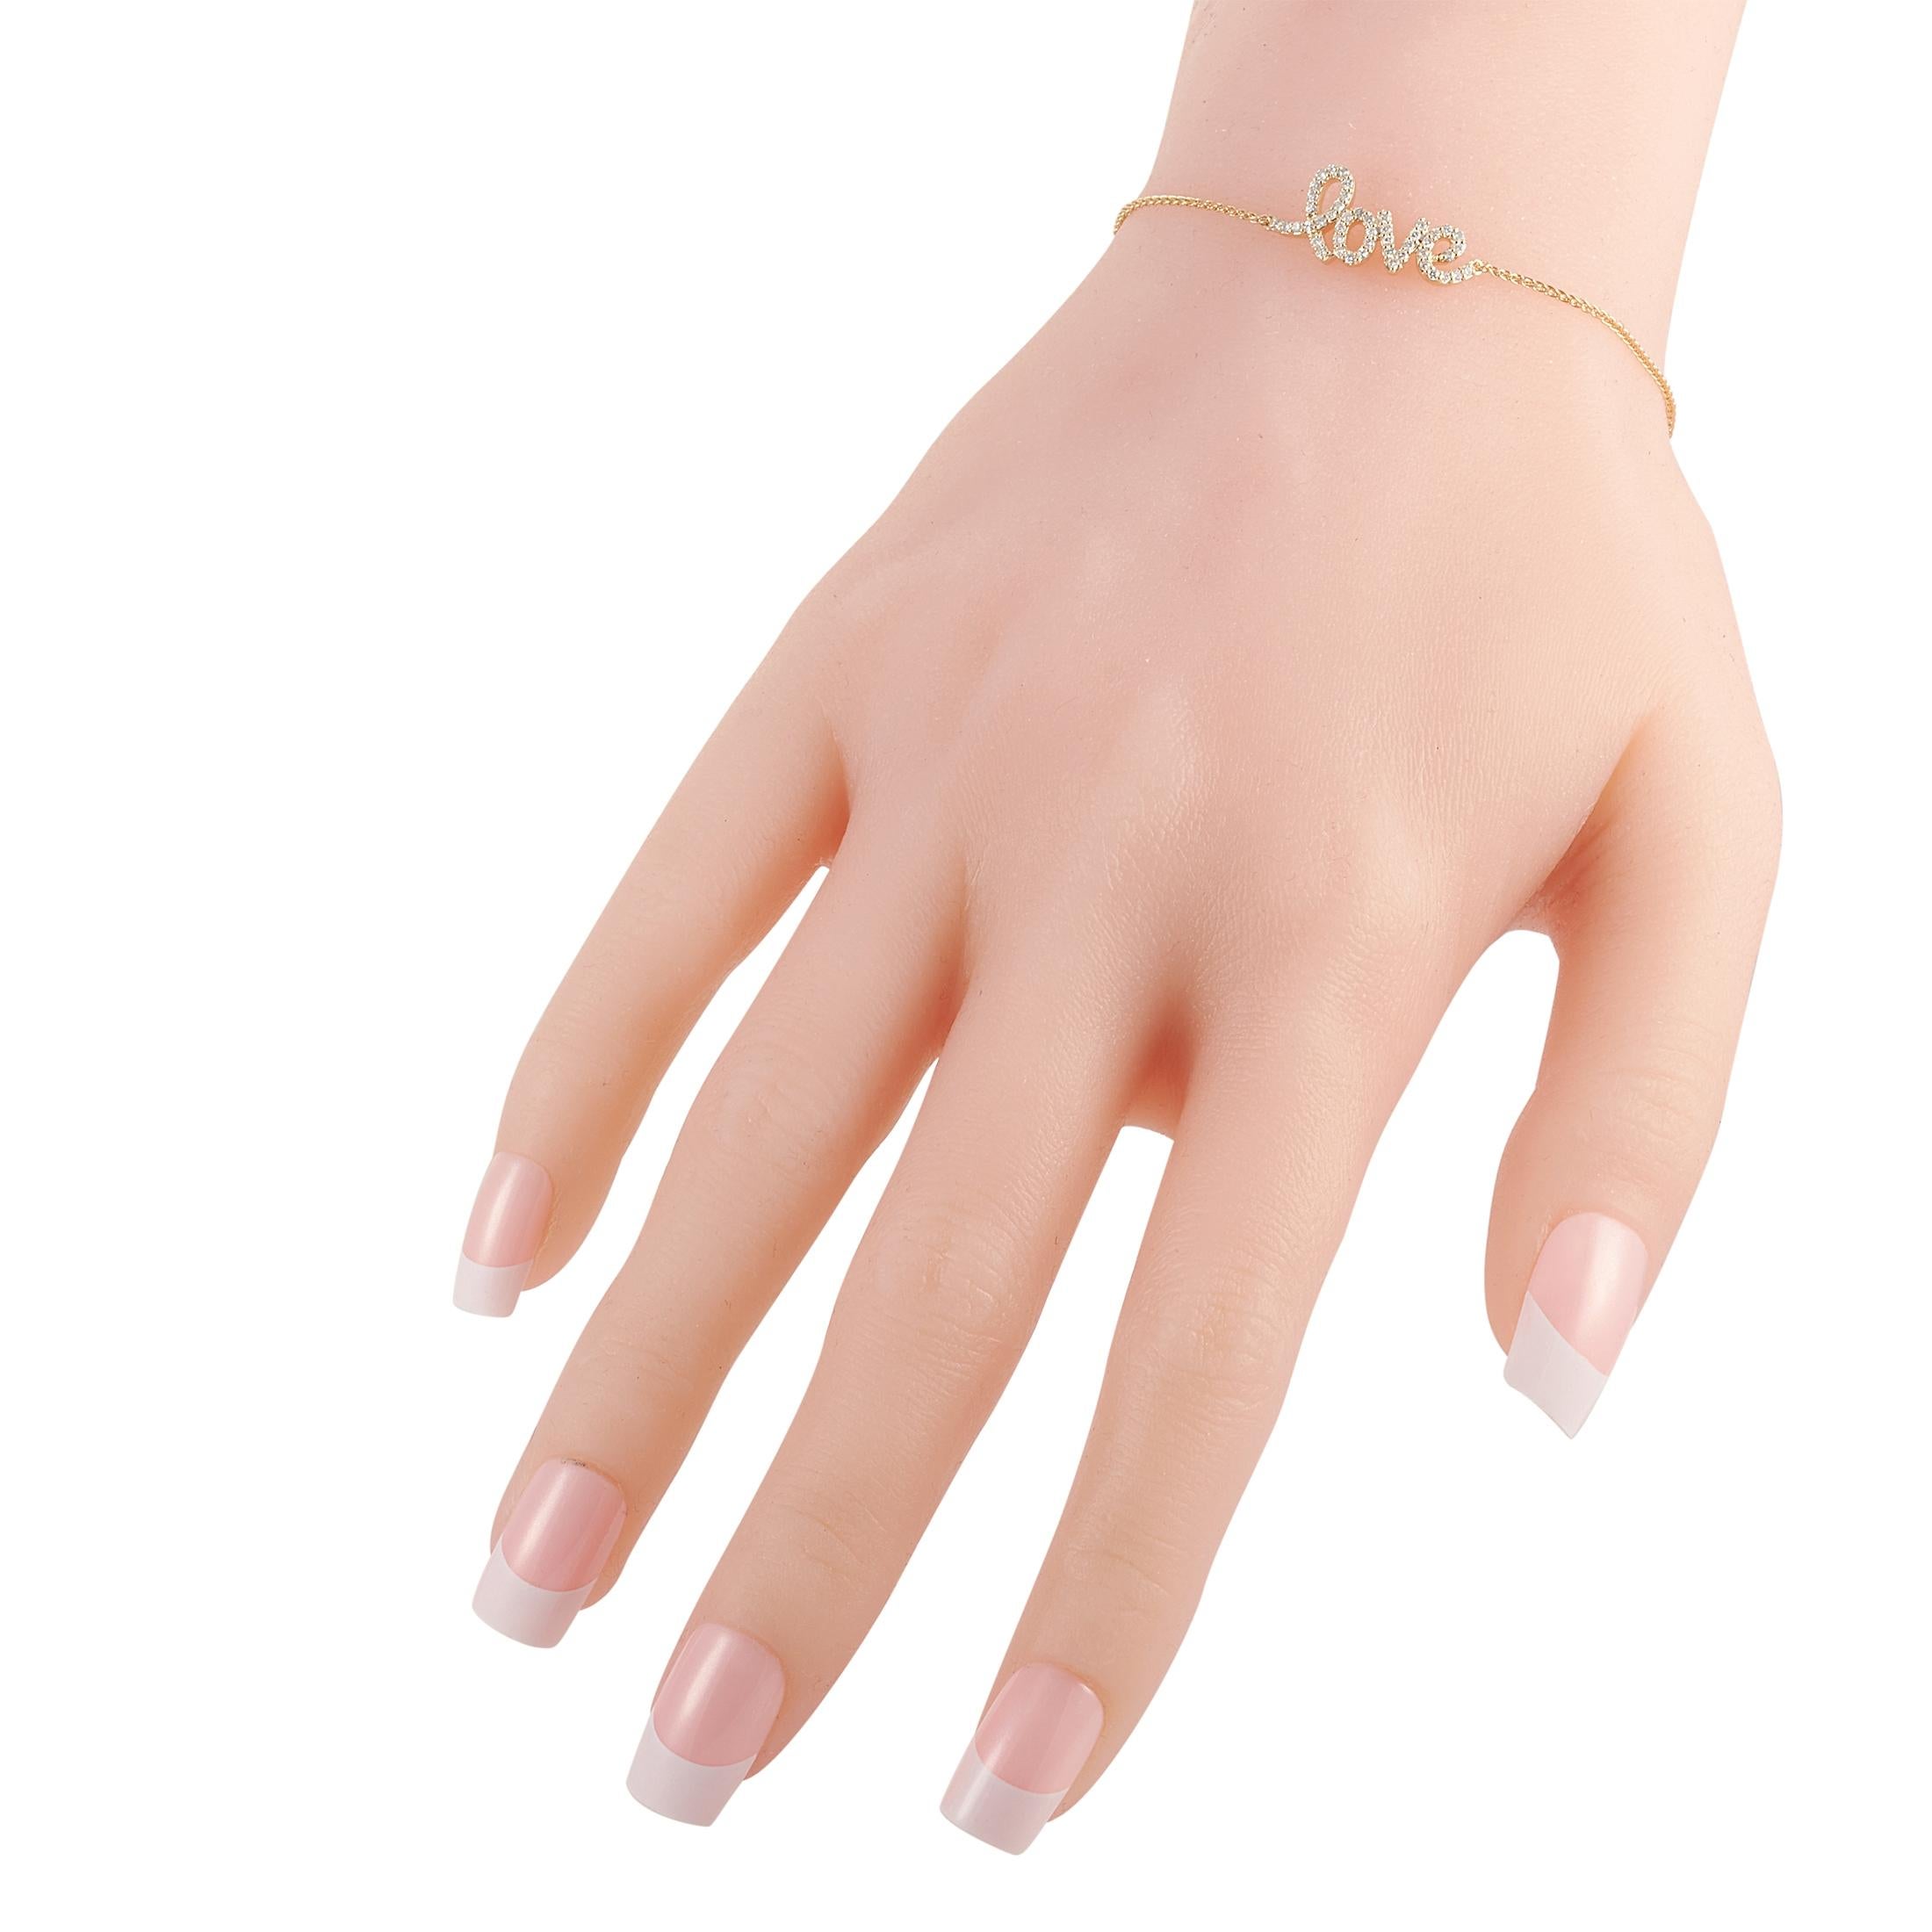 This LB Exclusive love bracelet is made of 14K yellow gold and embellished with diamonds that amount to 0.25 carats. The bracelet weighs 4.4 grams and measures 6.50” in length, which is adjustable.
 
 Offered in brand new condition, this jewelry